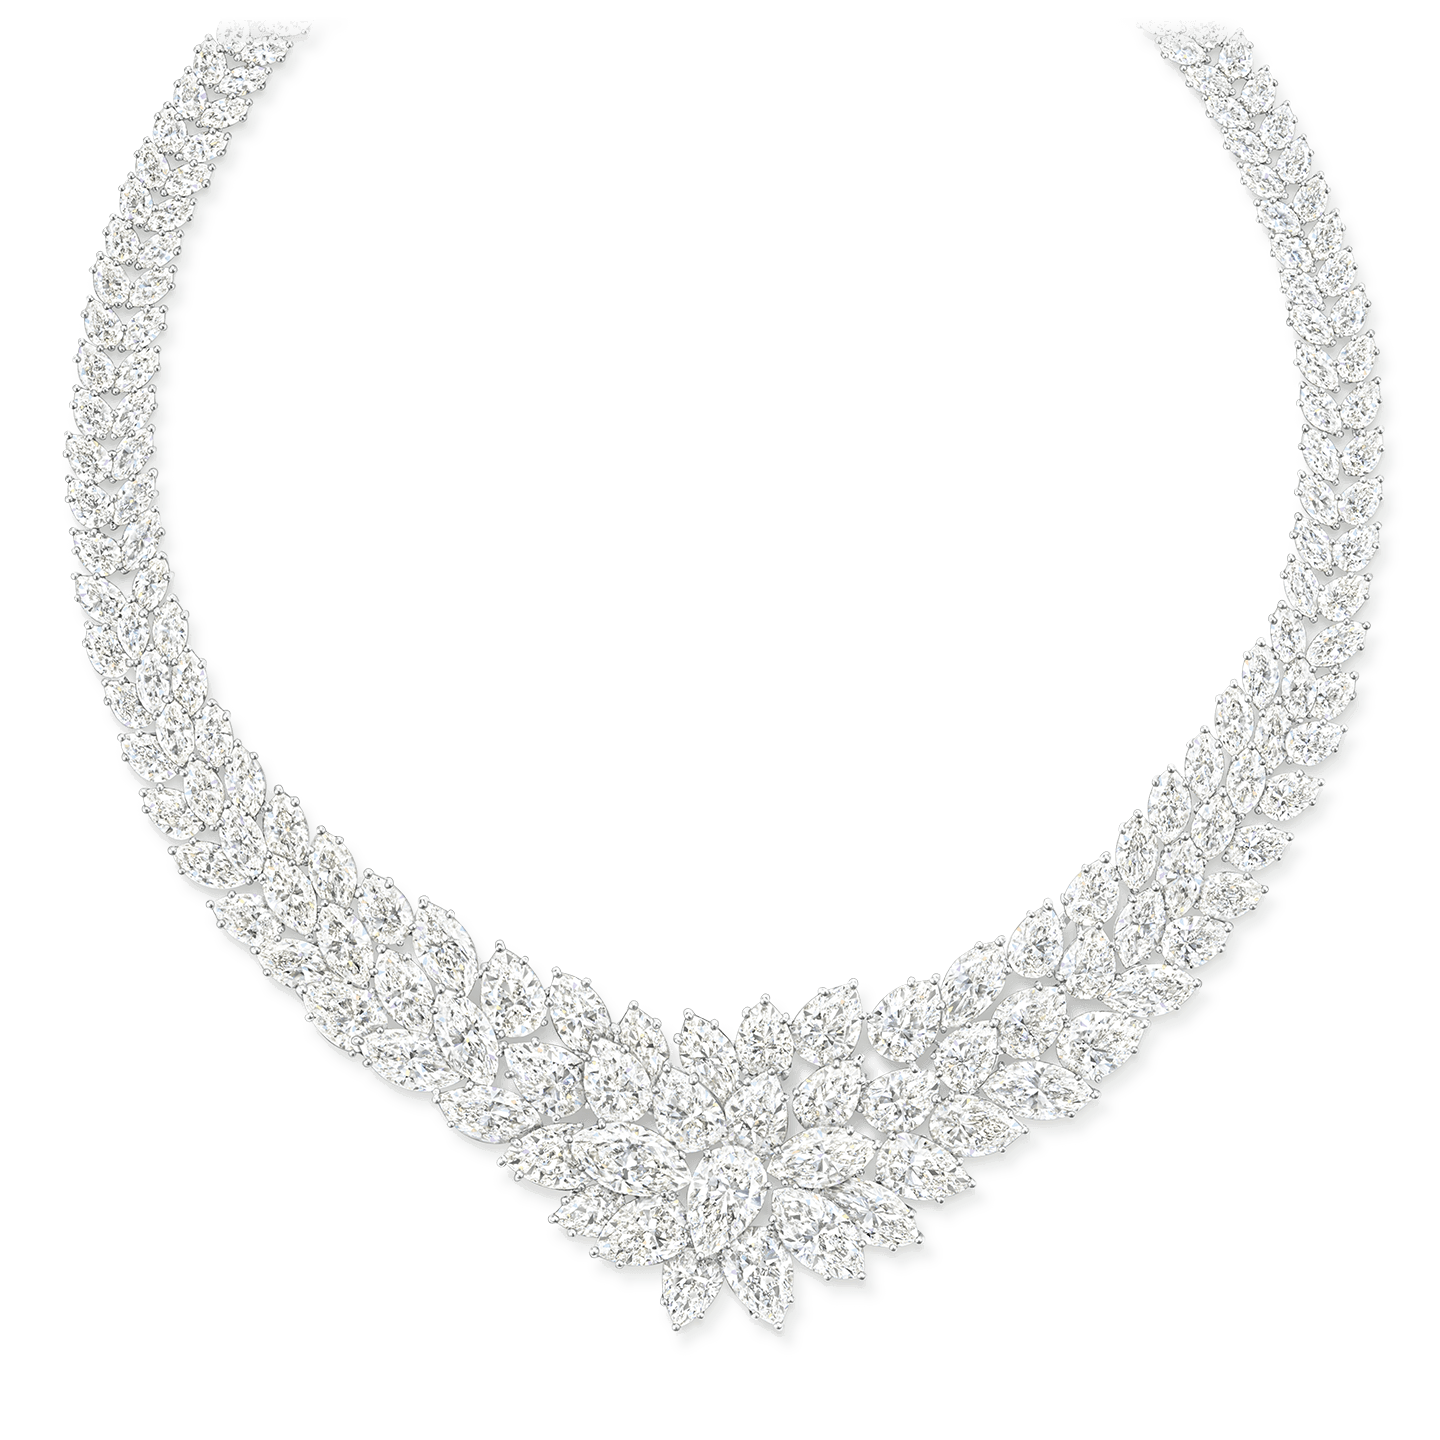 A necklace featuring 195 marquise and pear-shaped diamonds weighing a total of approximately 136.66 carats, set in platinum.